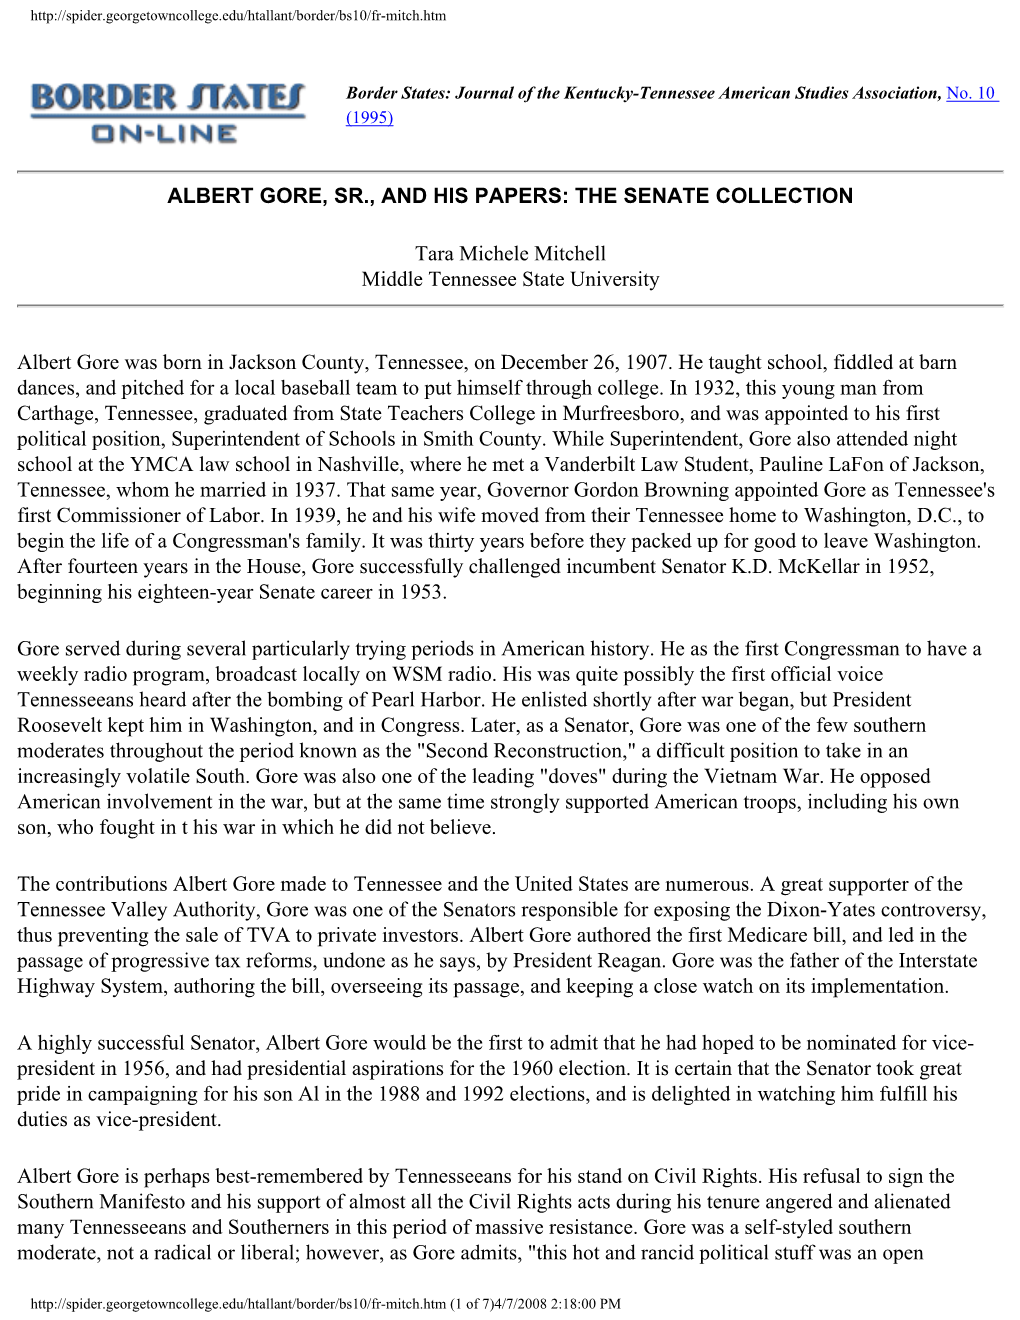 Albert Gore, Sr., and His Papers: the Senate Collection